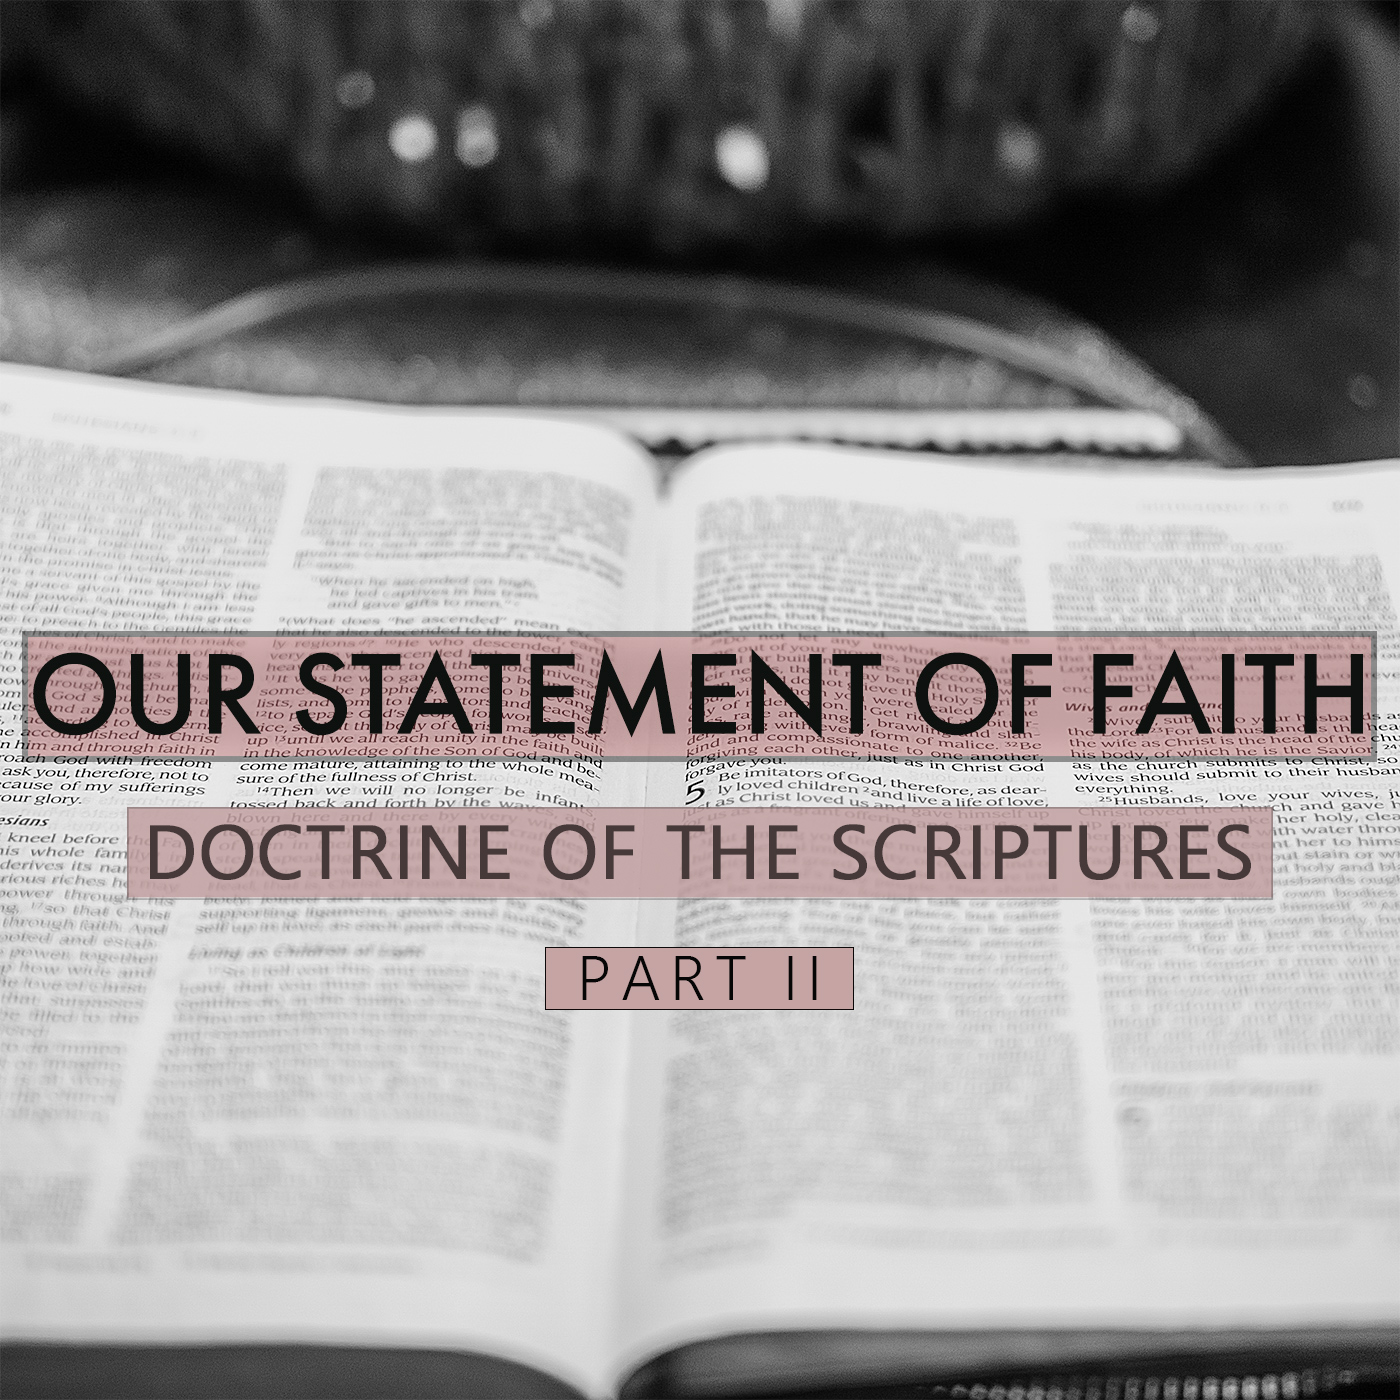 Statement of faith - Doctrine of the scriptures (Part II)